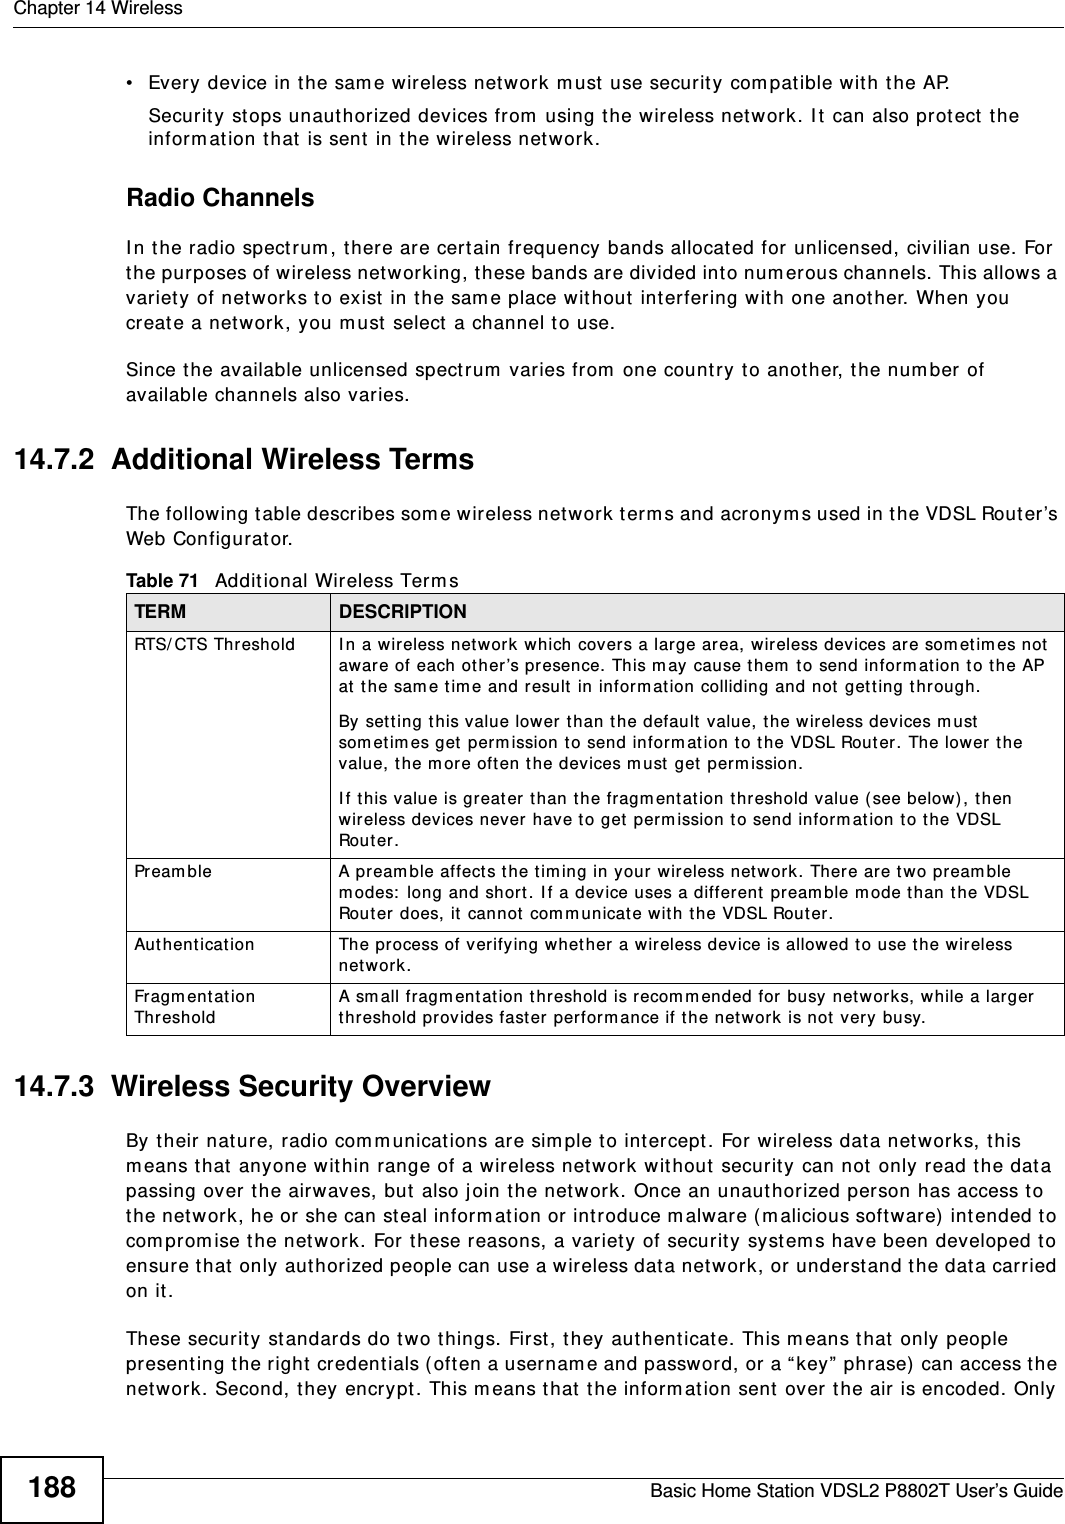 Chapter 14 WirelessBasic Home Station VDSL2 P8802T User’s Guide188• Every device in t he sam e wireless net work m ust  use security com patible wit h the AP.Security st ops unauthorized devices from using the wireless net work. I t can also prot ect  the inform ation t hat  is sent  in t he wireless net work.Radio ChannelsI n the radio spect rum , there are certain frequency bands allocated for unlicensed, civilian use. For the purposes of wireless net working, t hese bands are divided int o num er ous channels. This allows a variet y of net works t o exist  in the sam e place wit hout  int erfer ing with one anot her. When you creat e a netw ork, you m ust  select  a channel to use. Since t he available unlicensed spectrum  varies from  one count ry to anot her, the num ber of available channels also varies. 14.7.2  Additional Wireless TermsThe following t able describes som e wireless net work term s and acronym s used in t he VDSL Router’s Web Configurator.14.7.3  Wireless Security OverviewBy their nat ure, radio comm unicat ions are sim ple t o intercept . For wireless dat a net works, t his m eans that  anyone wit hin range of a wireless net work without security can not only read t he dat a passing over t he airwaves, but  also j oin t he net work. Once an unaut horized person has access t o the net work, he or she can steal inform ation or int roduce m alware ( m alicious software) intended t o com prom ise t he net work. For t hese reasons, a variety of security syst em s have been developed t o ensure t hat only aut horized people can use a wireless dat a net work, or underst and the data carried on it.These security st andards do two things. First, they authenticat e. This m eans t hat  only people present ing t he right credentials ( oft en a usernam e and password, or a “ key”  phrase)  can access the net work. Second, t hey encrypt . This m eans t hat  the inform ation sent  over  the air is encoded. Only Table 71   Addit ional Wireless Term sTERM DESCRIPTIONRTS/ CTS Threshold I n a wireless net work which covers a large area, wireless dev ices are som et im es not  aware of each ot her ’s pr esence. This m ay cause t hem t o send inform ation t o t he AP at  t he sam e t im e and result  in inform at ion colliding and not get ting through.By set ting this value lower than the default  value, t he w ireless dev ices m ust  sometim es get  per m ission t o send inform at ion t o t he VDSL Router. The lower the value, the m ore oft en the devices m ust  get  perm ission.I f t his value is greater t han t he fragm entat ion threshold value (see below), then wir eless devices never have to get  per m ission t o send infor m at ion t o the VDSL Rou t er .Pream ble A pr eamble affects the t im ing in your wireless net work. There are tw o pream ble m odes:  long and short . I f a dev ice uses a different preamble m ode than t he VDSL Rout er does, it  cannot com m unicate with the VDSL Router.Aut hentication The process of verifying whet her a wireless device is allow ed to use t he w ireless netw ork.Fragm ent ation ThresholdA sm all fragm entation t hreshold is recom m ended for busy net works, while a larger threshold prov ides fast er  perform ance if the netw ork is not  very busy.